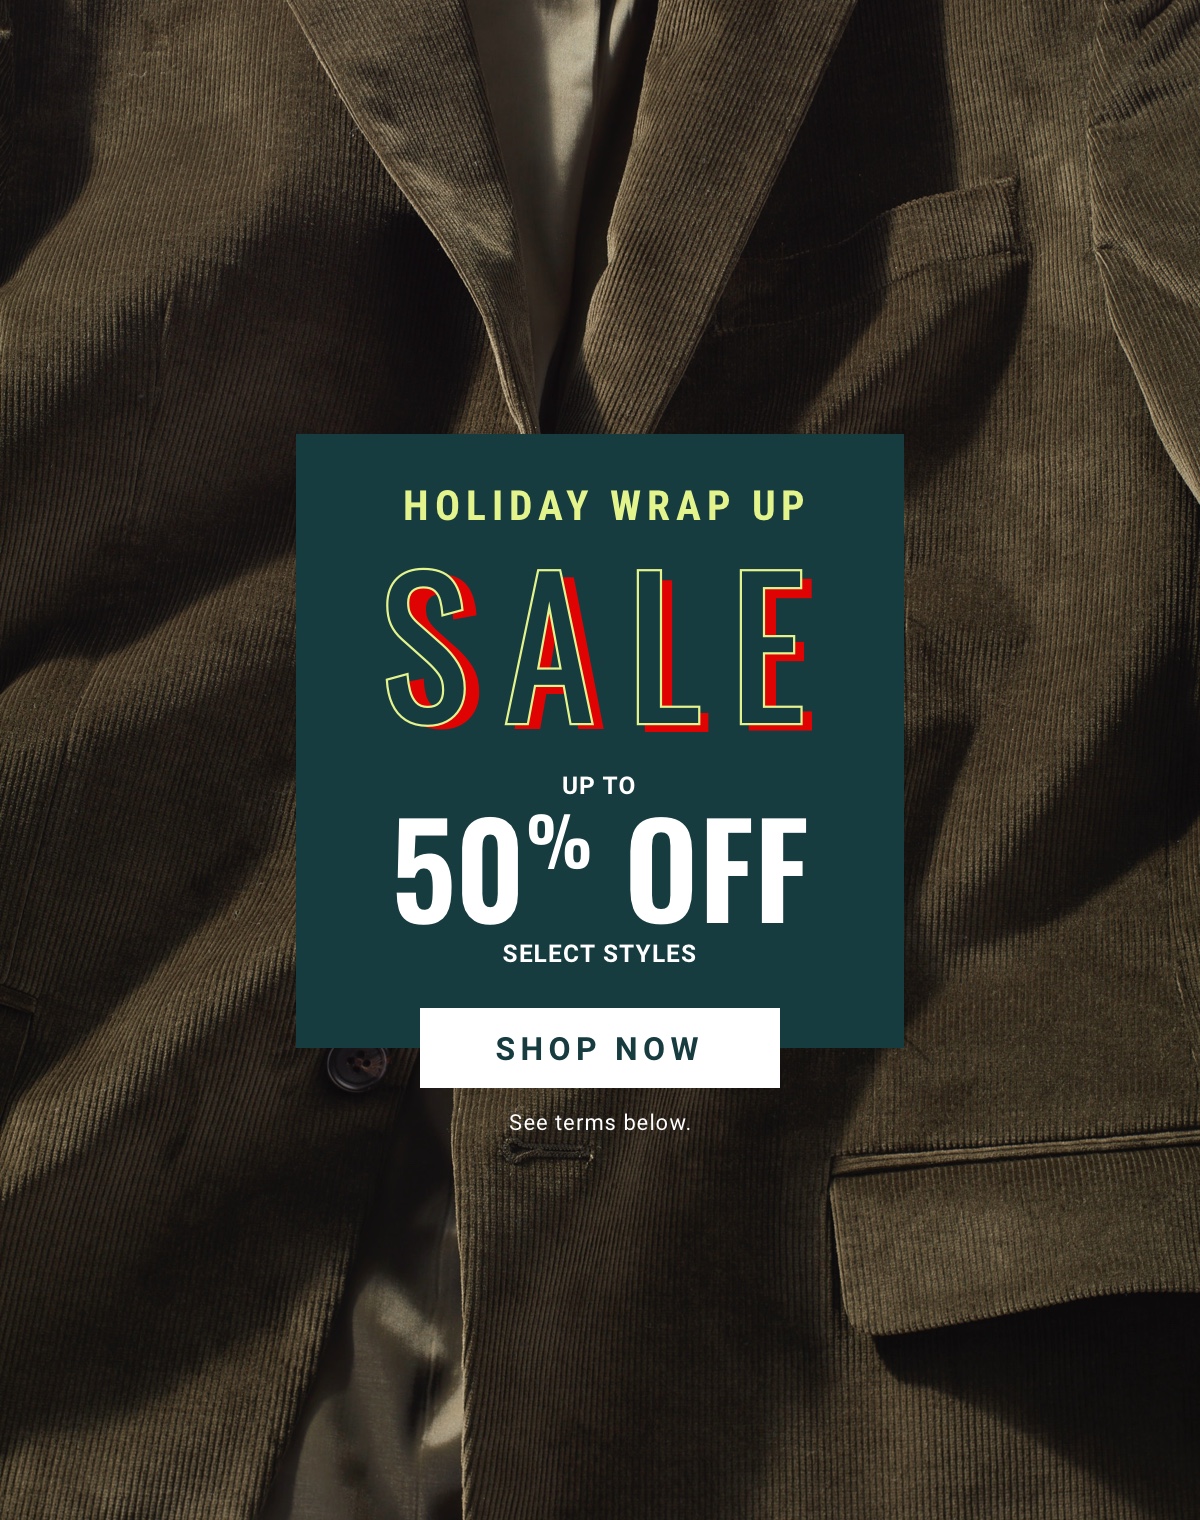 Holiday Wrap Up Sale Wrap Up Your List For Less Up to 50% Off Select Styles Shop Now